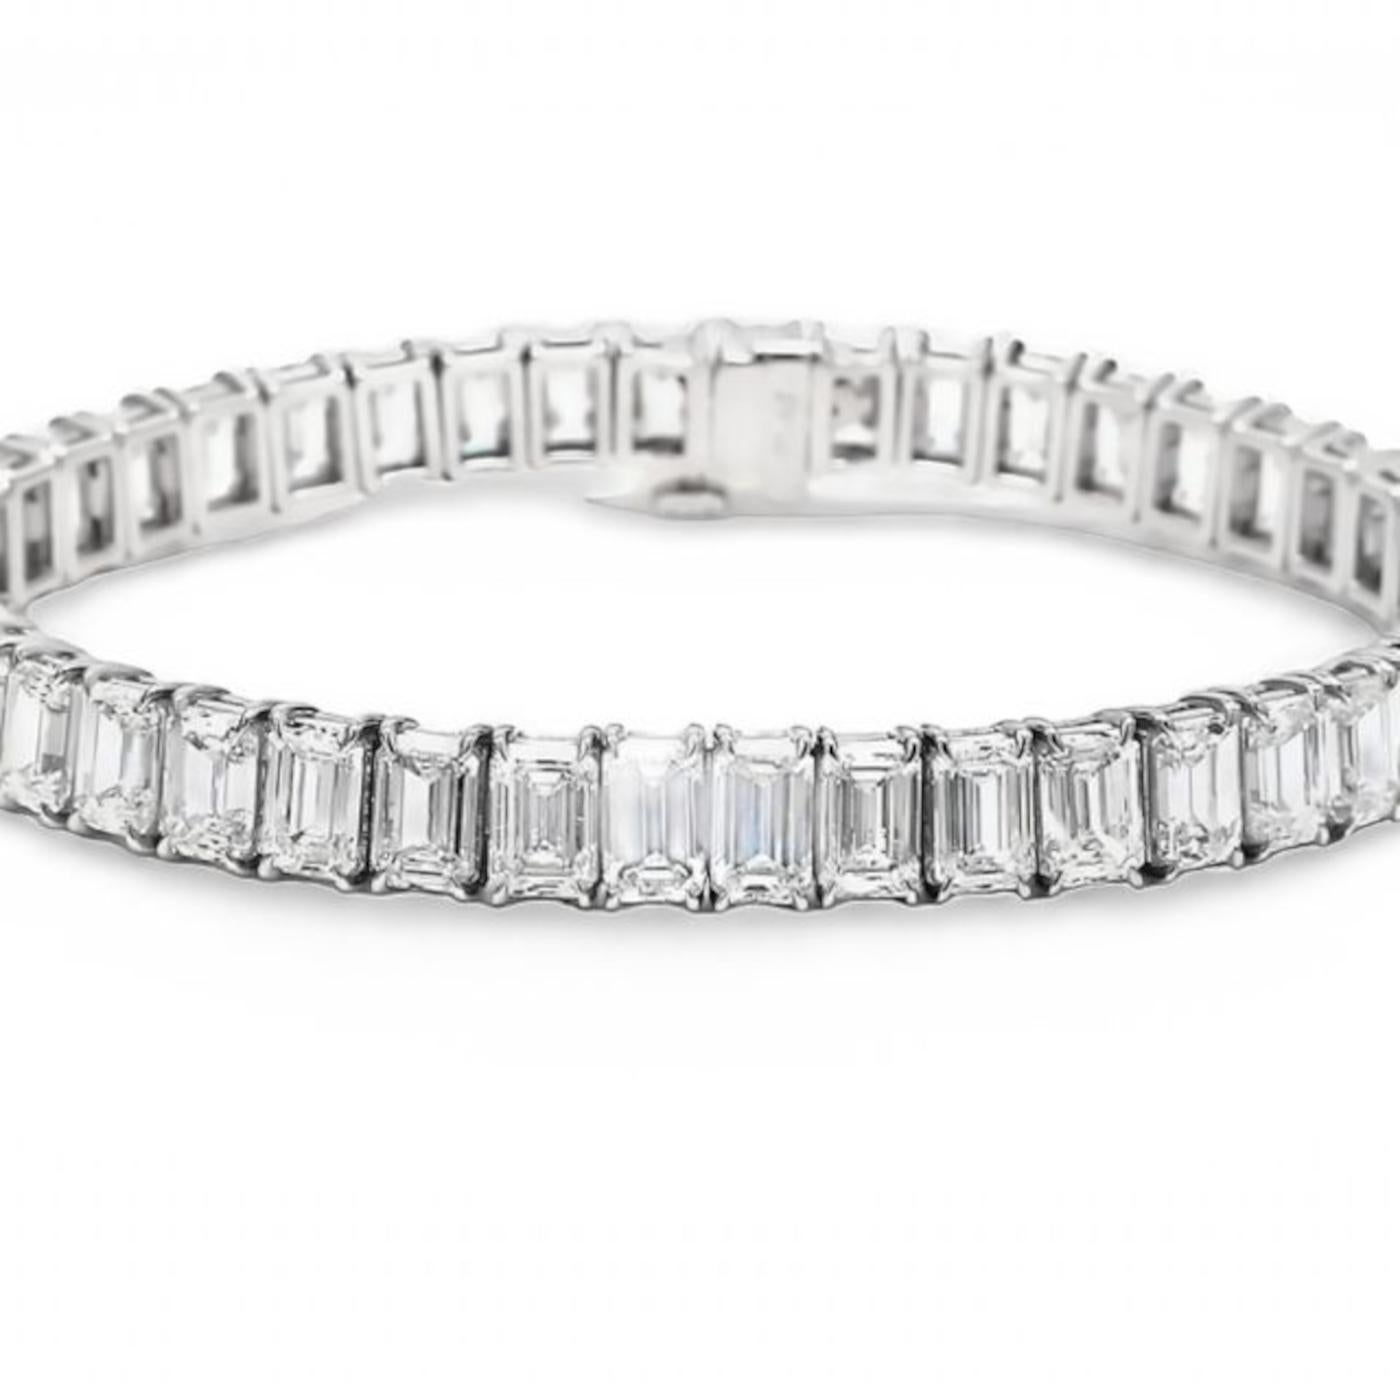 GIA Certified 22.75 Carat Emerald Cut Diamond Bracelet 45 GIA Certificates In New Condition For Sale In Rome, IT